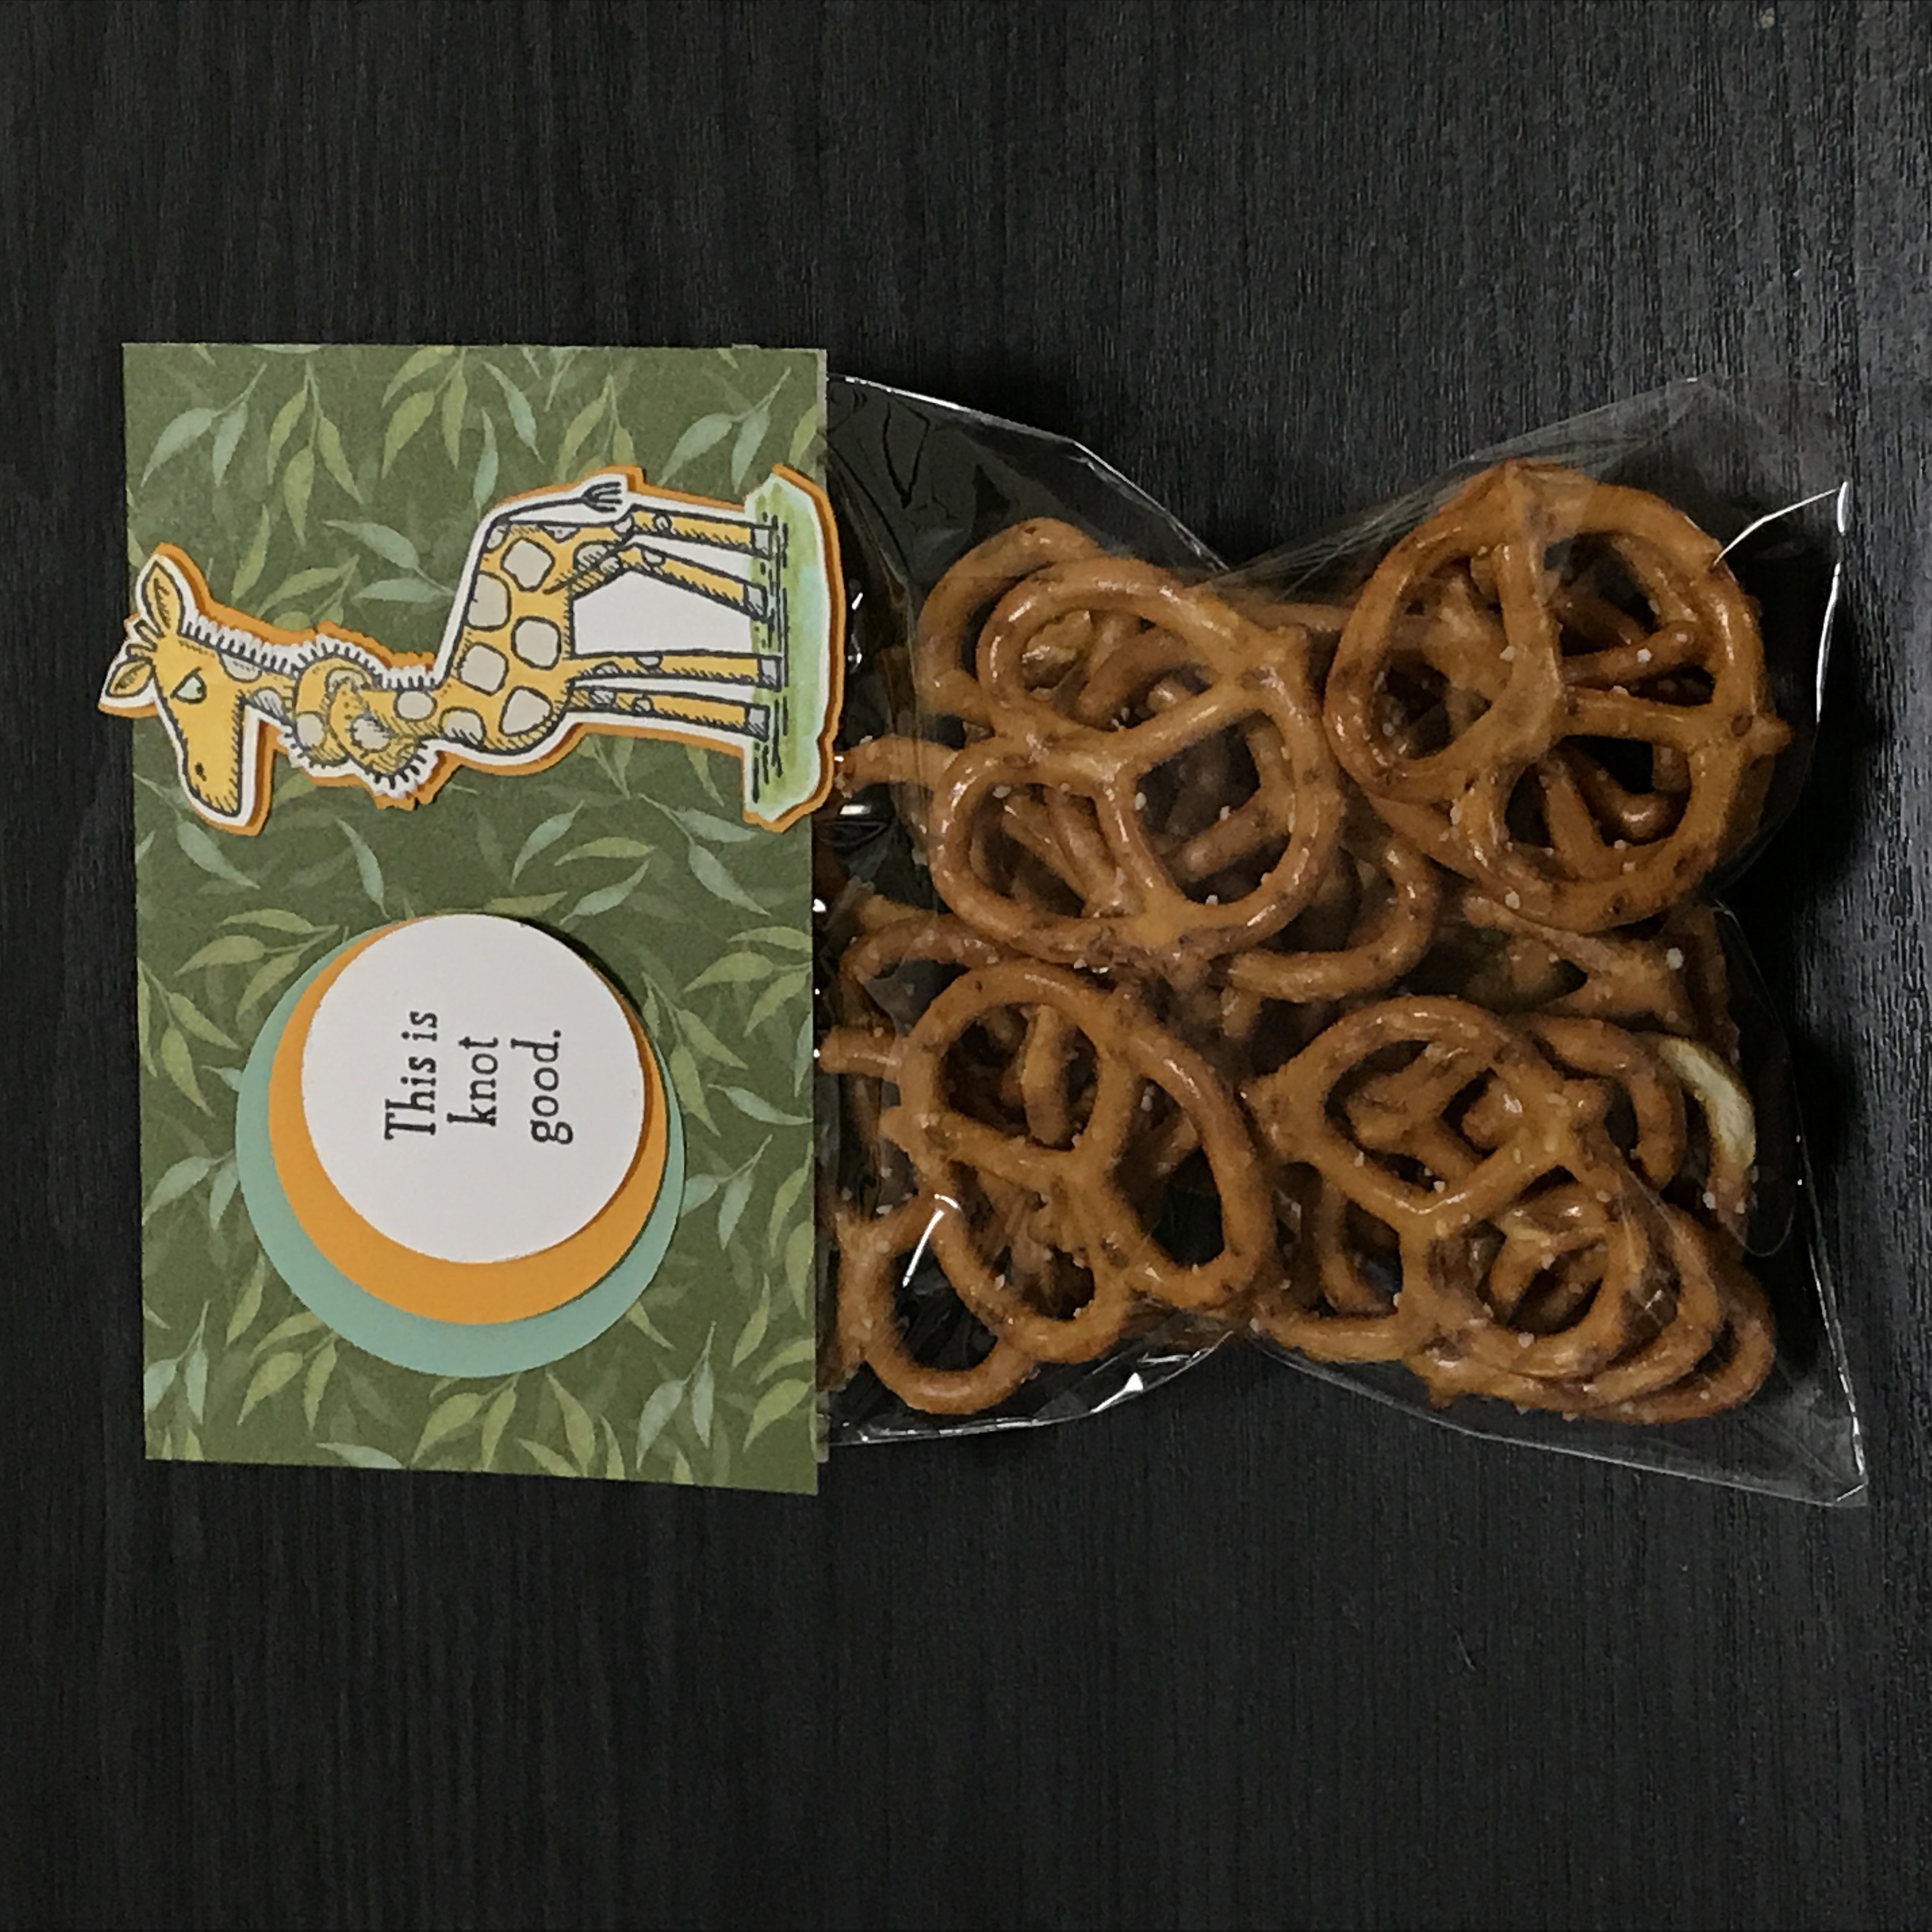 Back on your Feet Stampin' Up! Pretzel Treats